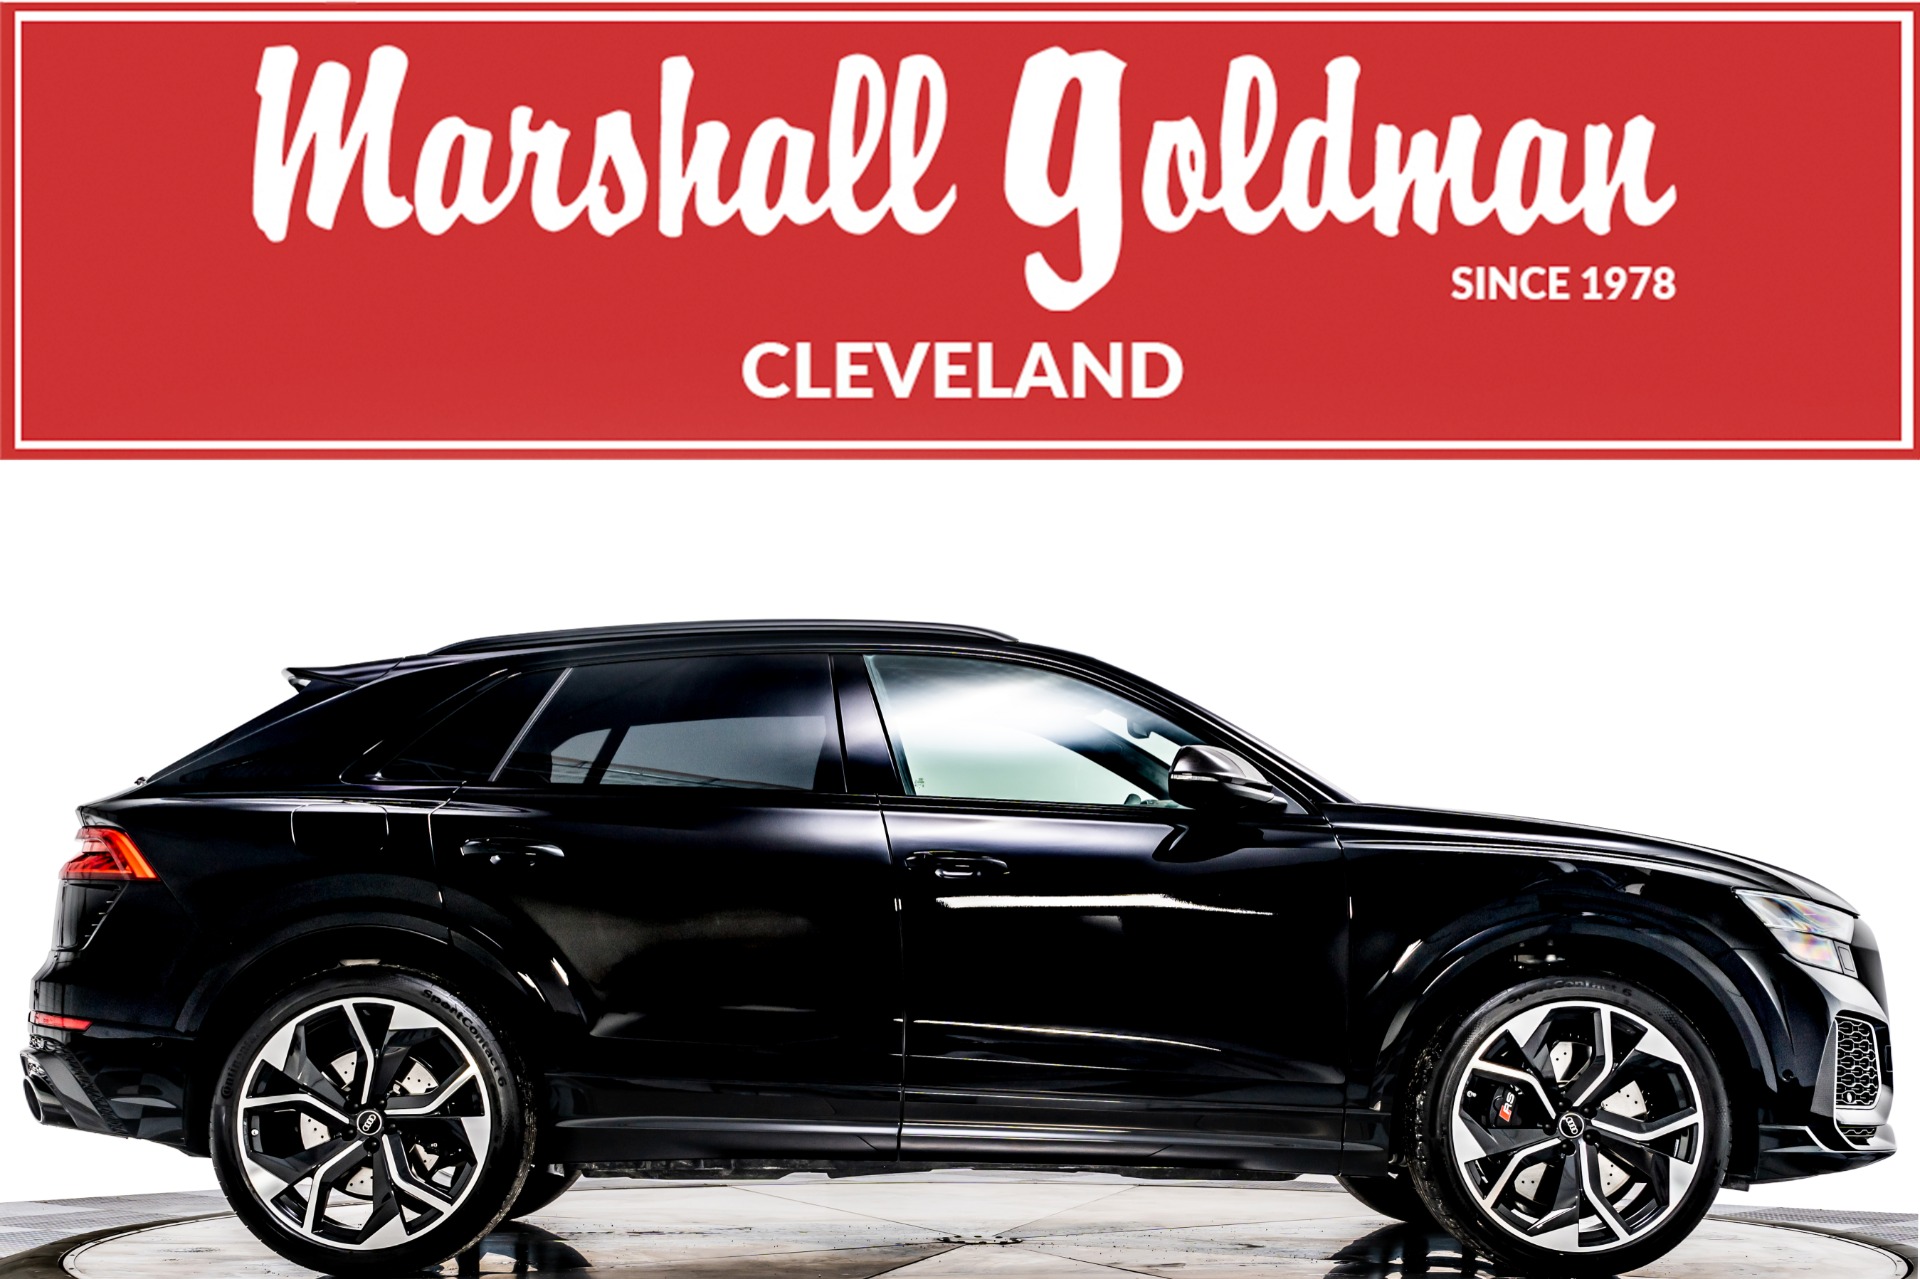 og:title":"Used 2021 Audi RS Q8 For Sale (Sold) | Marshall Goldman Motor  Sales Stock #W21510","og:description":"Used 2021 Audi RS Q8 Stock # W21510  in Warrensville Heights, OH at Marshall Goldman Motor Sales, OH's